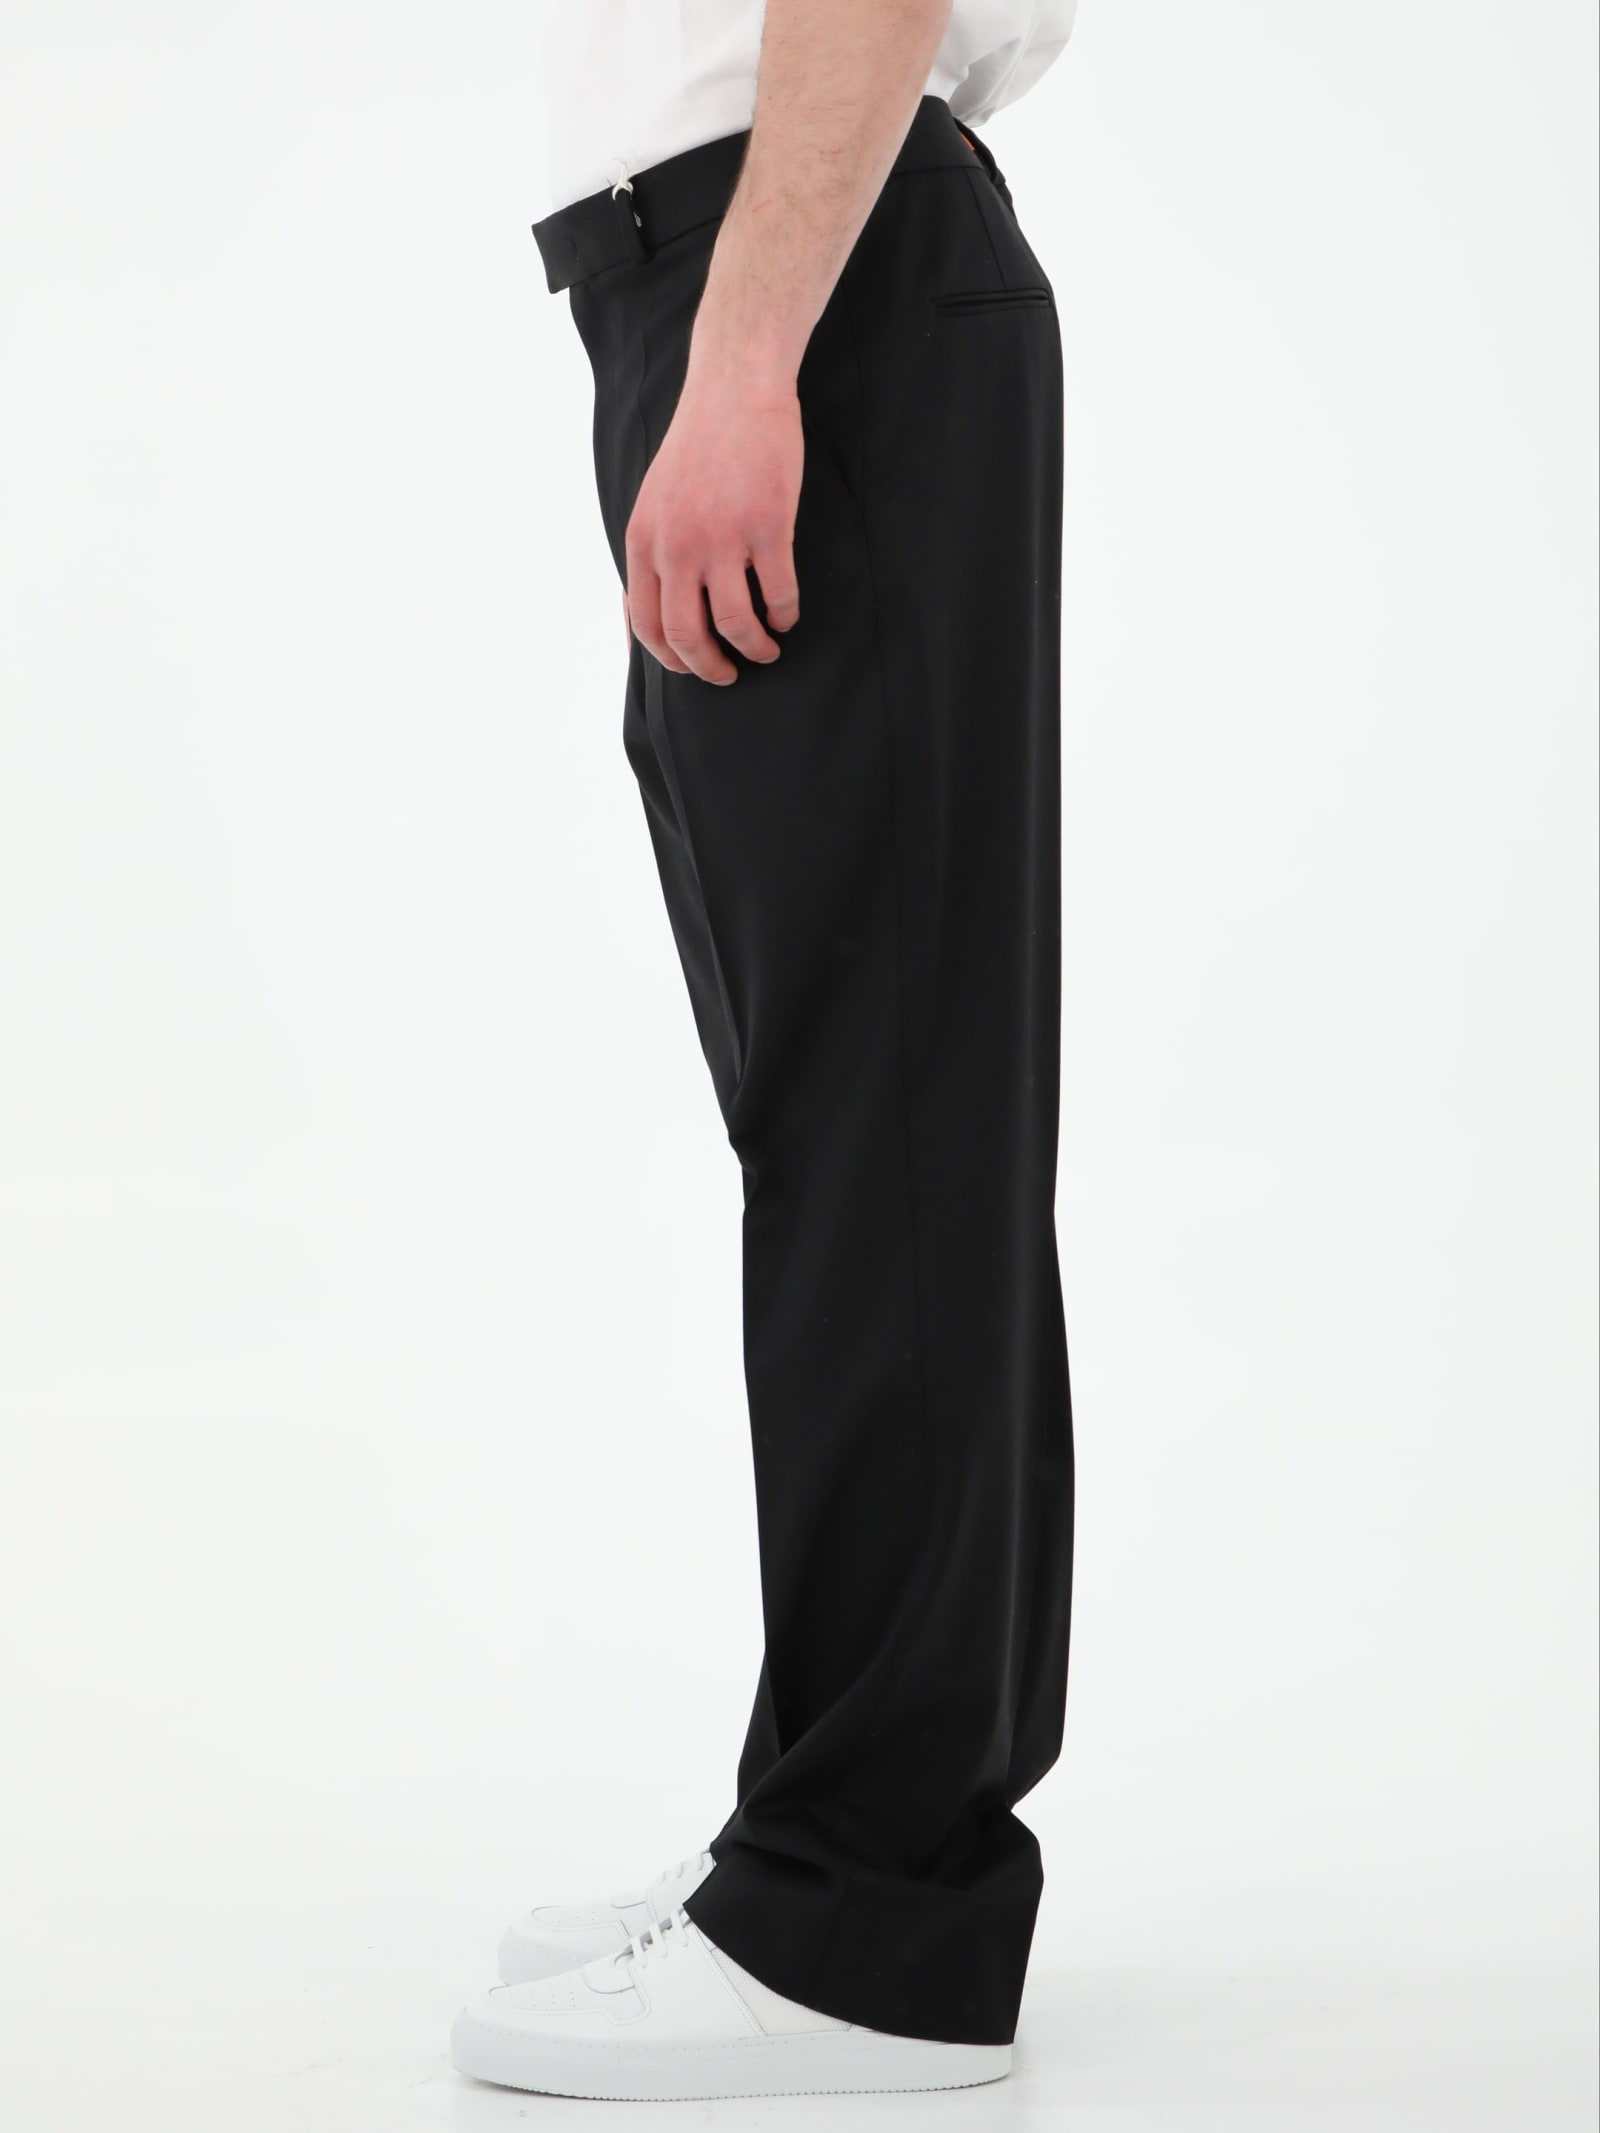 Shop Valentino Black Tailored Trousers